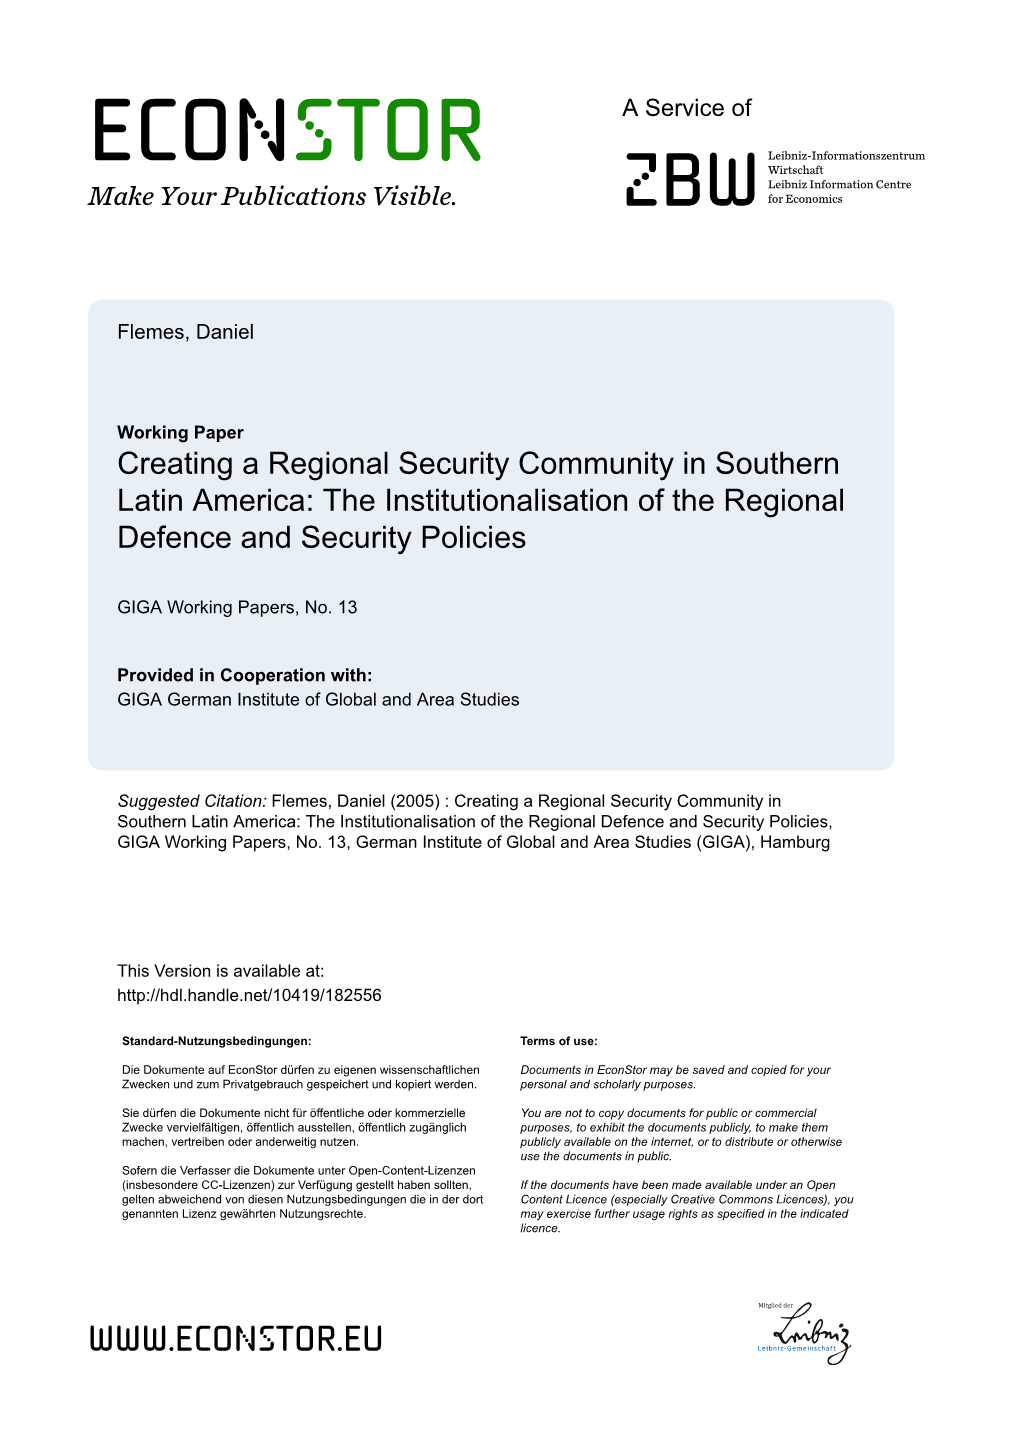 Creating a Regional Security Community in Southern Latin America: the Institutionalisation of the Regional Defence and Security Policies